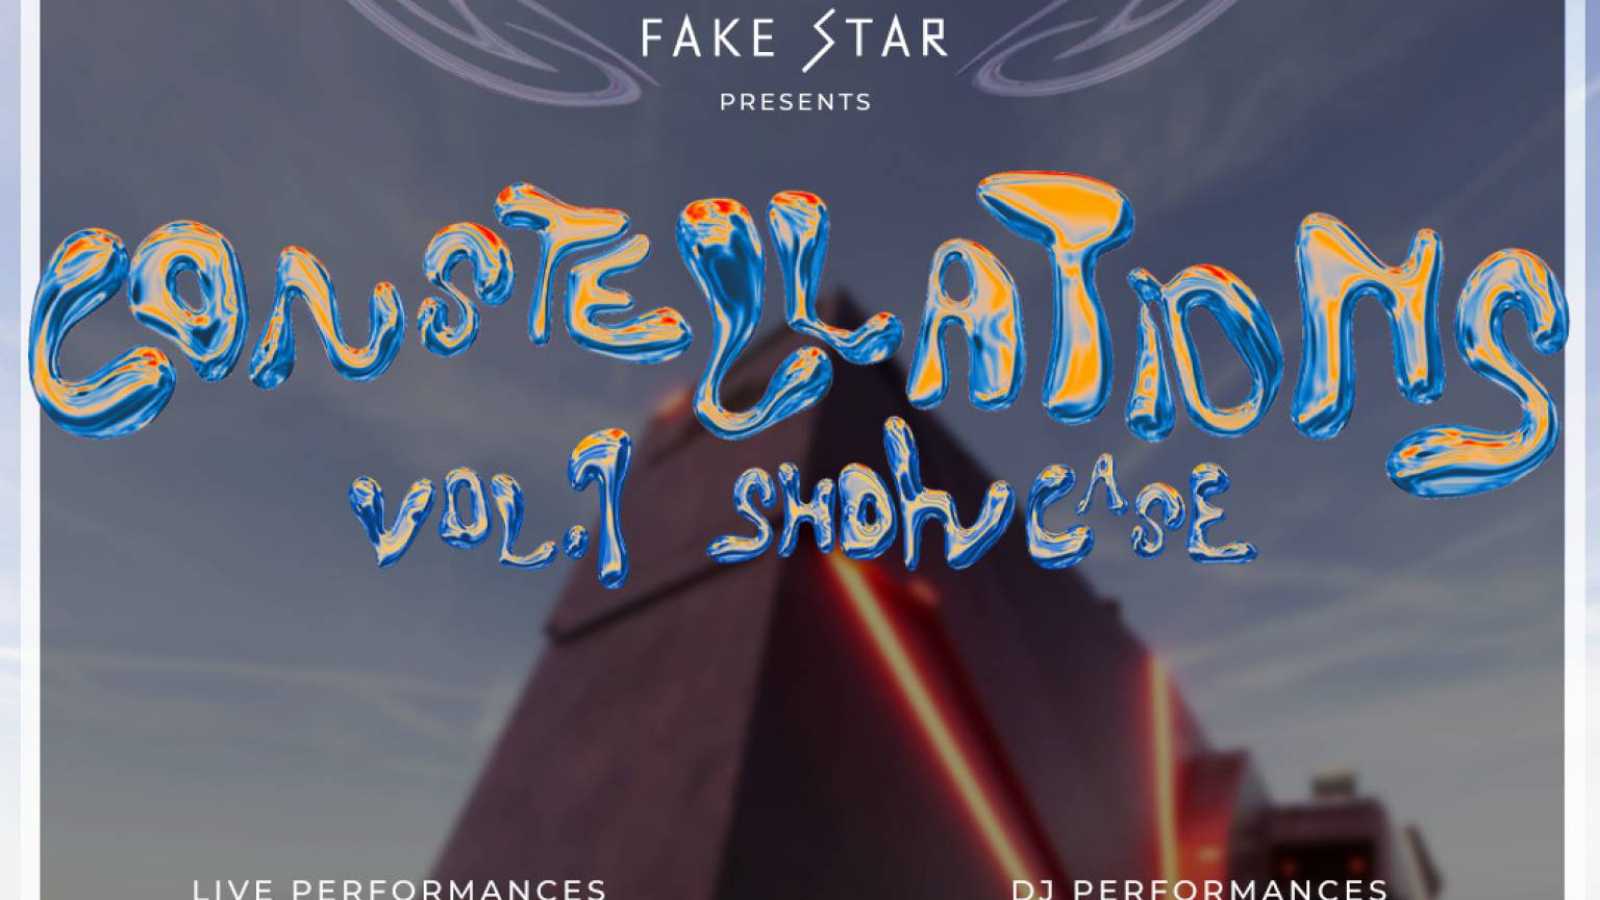 FAKE STAR USA’s “Constellations Vol. 1” Showcase to Be Live Streamed Worldwide © FAKE STAR USA. All rights reserved.